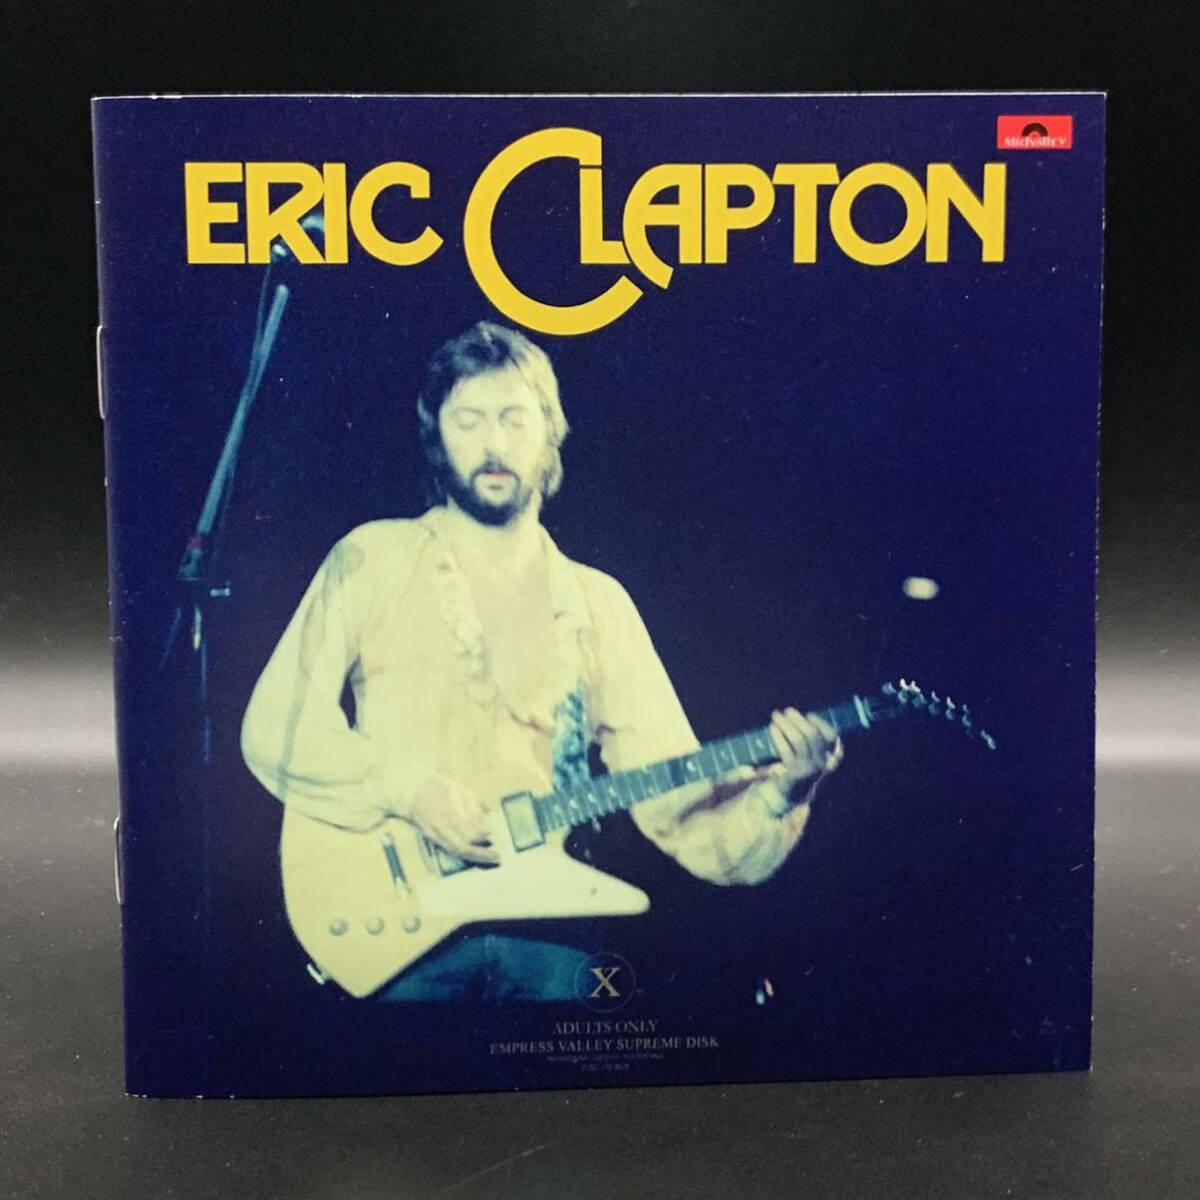 ERIC CLAPTON / TROPICAL SOUND SHOWER「亜熱帯武道館」(6CD BOX with Booklet) 初来日武道館3公演を全て初登場音源で収録！完売品！の画像9